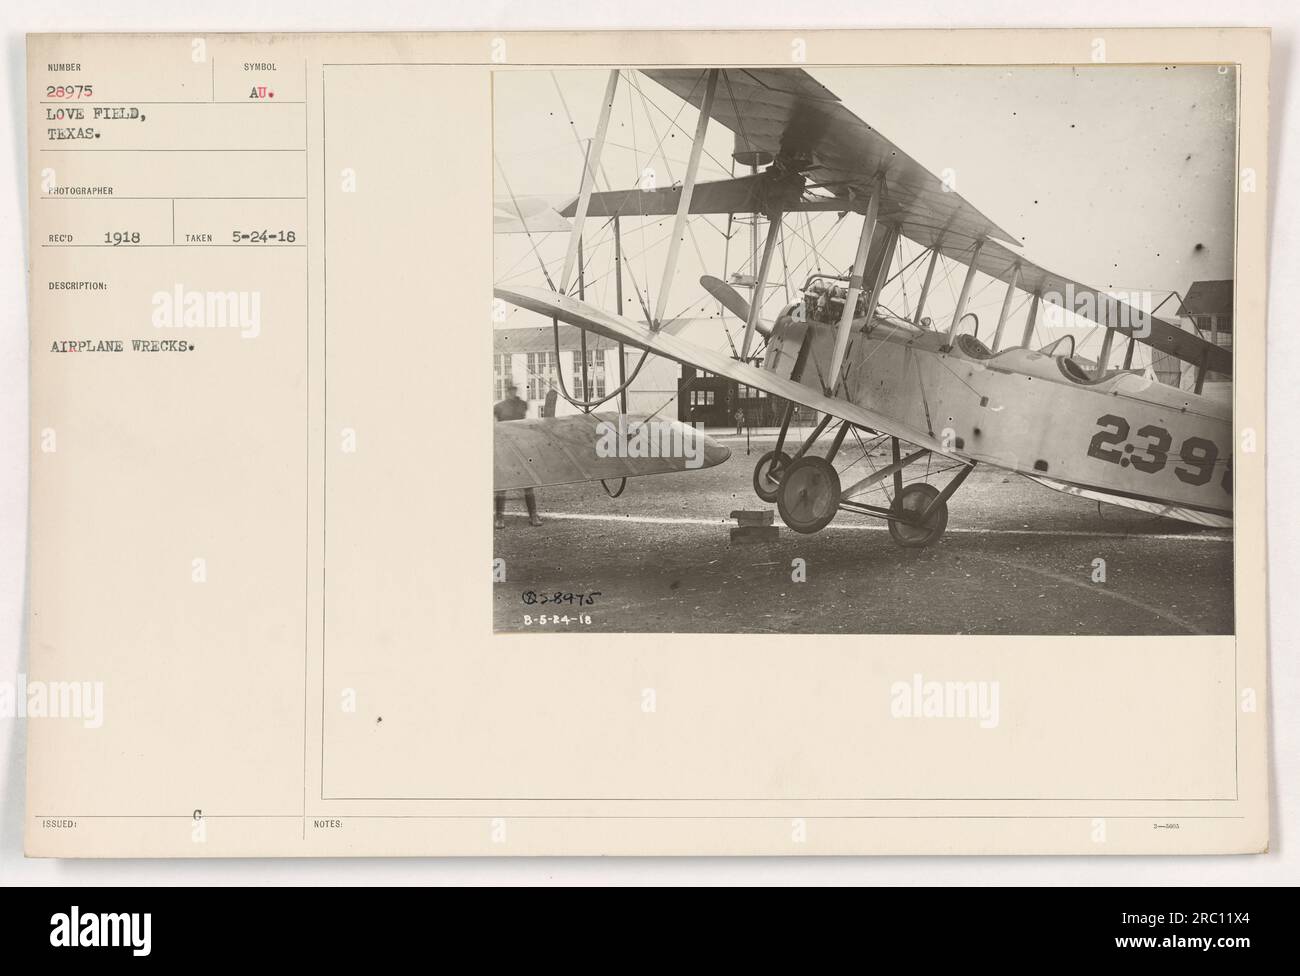 This photograph 111-SC-28975 was taken in Love Field, Texas in 1918. It shows the wreckage of airplanes. The photographer noted the date as May 24, 1918 and the symbol AU was issued. Further information indicated that the image was numbered 5.8975 and taken on August 5, 1918 at 2:39 PM. Stock Photo